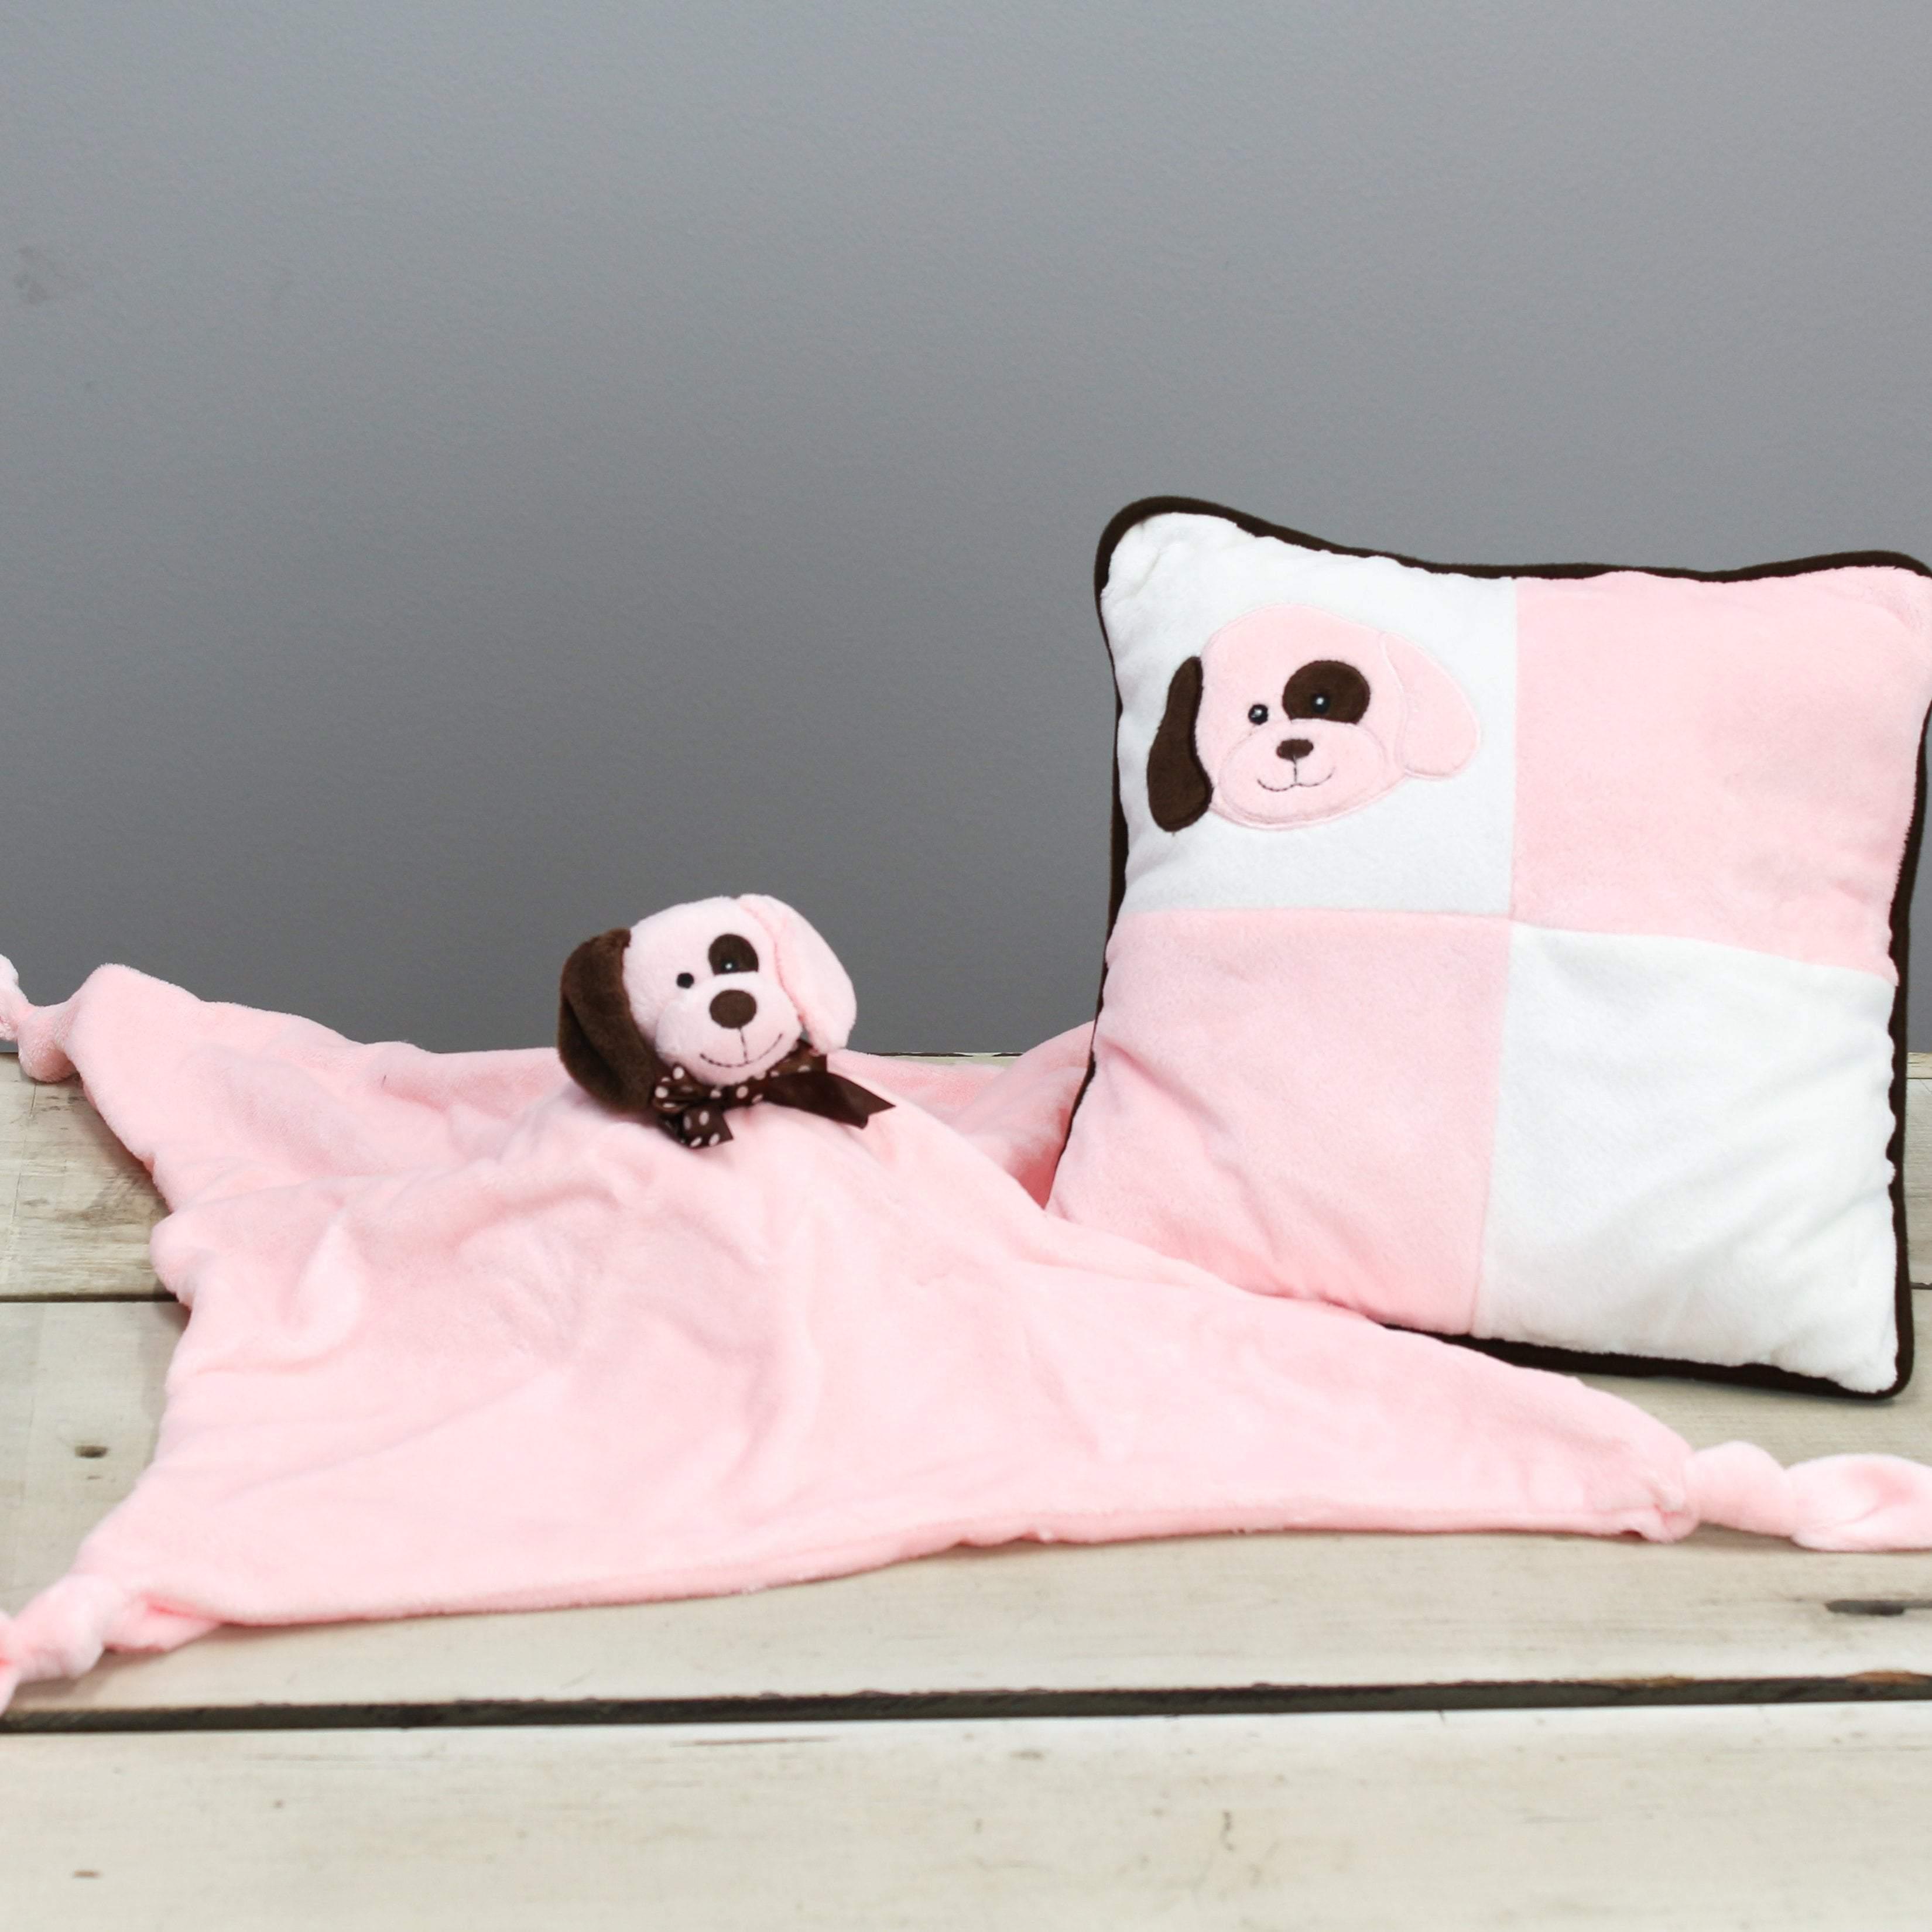 "Jean" the 20in Pink Puppy Pillow and Cuddle Blanket Set by KidKraft